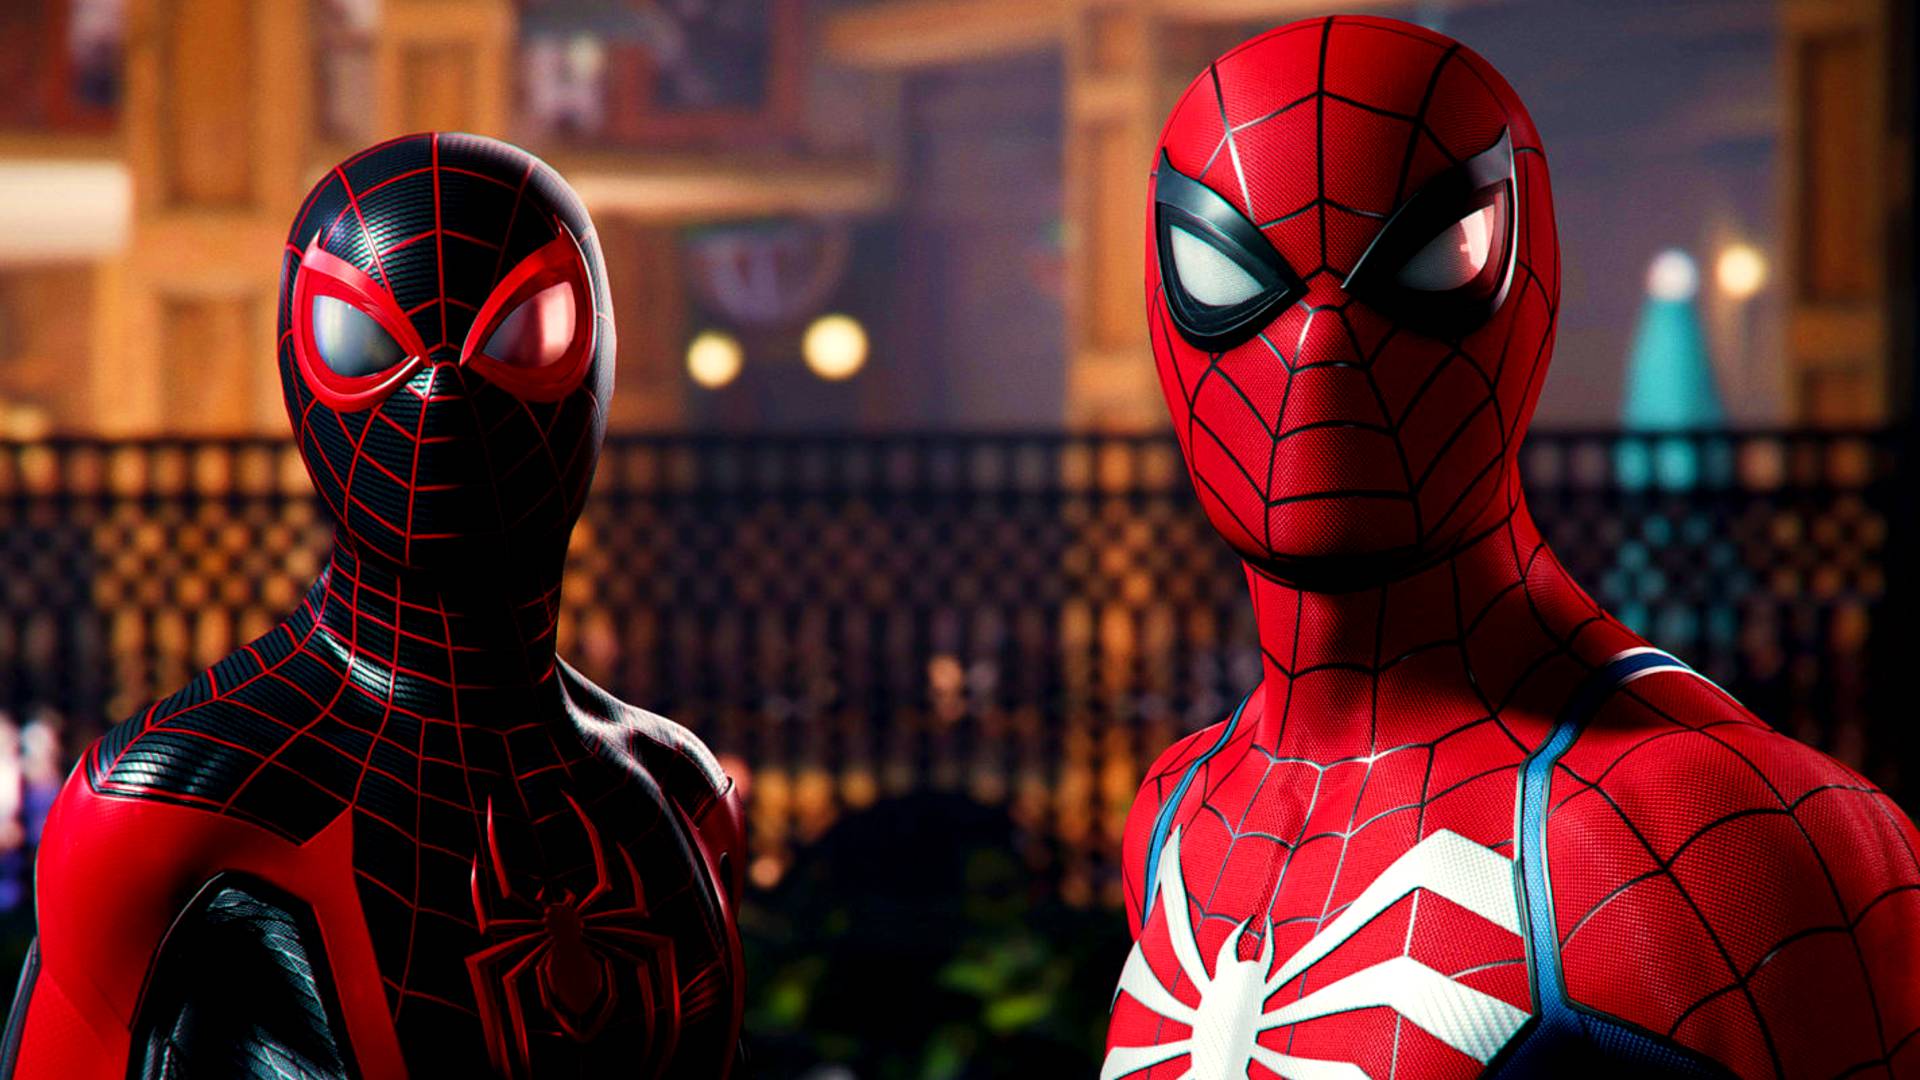 Marvel's 2 release date rumours, and more | The Loadout